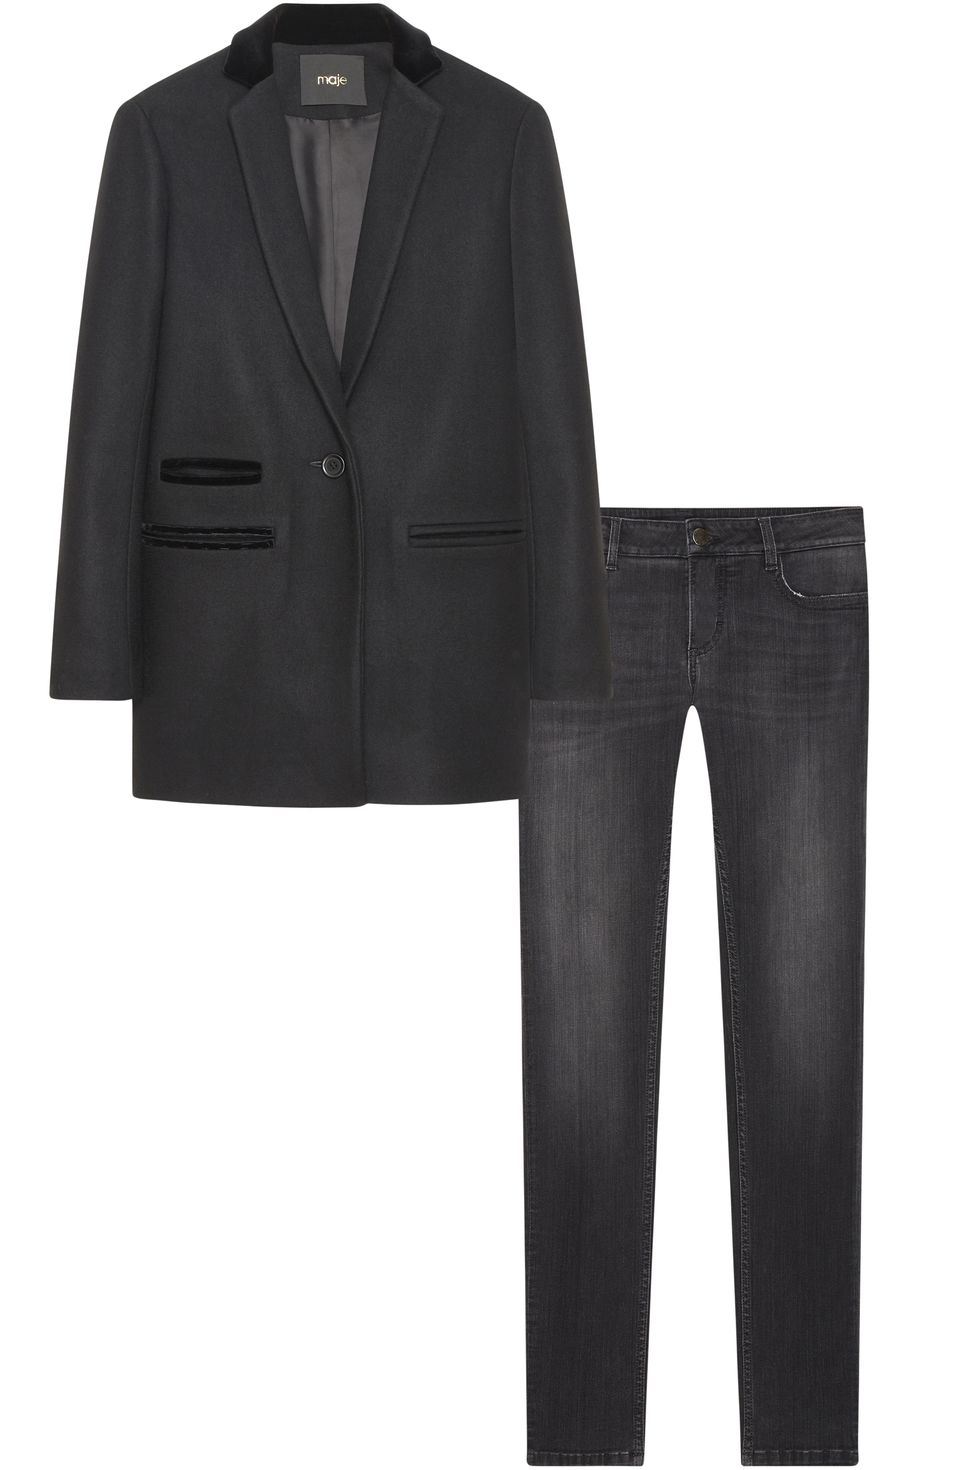 <p>"A fitted blazer, a men's shirt, and a pair of slim jeans or well-cut classic pants." <em data-redactor-tag="em" data-verified="redactor">—Judith</em></p><p><em data-redactor-tag="em" data-verified="redactor">Maje jacket, $675, and jeans, $220,&nbsp;<a href="http://us.maje.com/" target="_blank" data-tracking-id="recirc-text-link">maje.com</a>.<span class="redactor-invisible-space" data-verified="redactor" data-redactor-tag="span" data-redactor-class="redactor-invisible-space"></span><br></em></p>